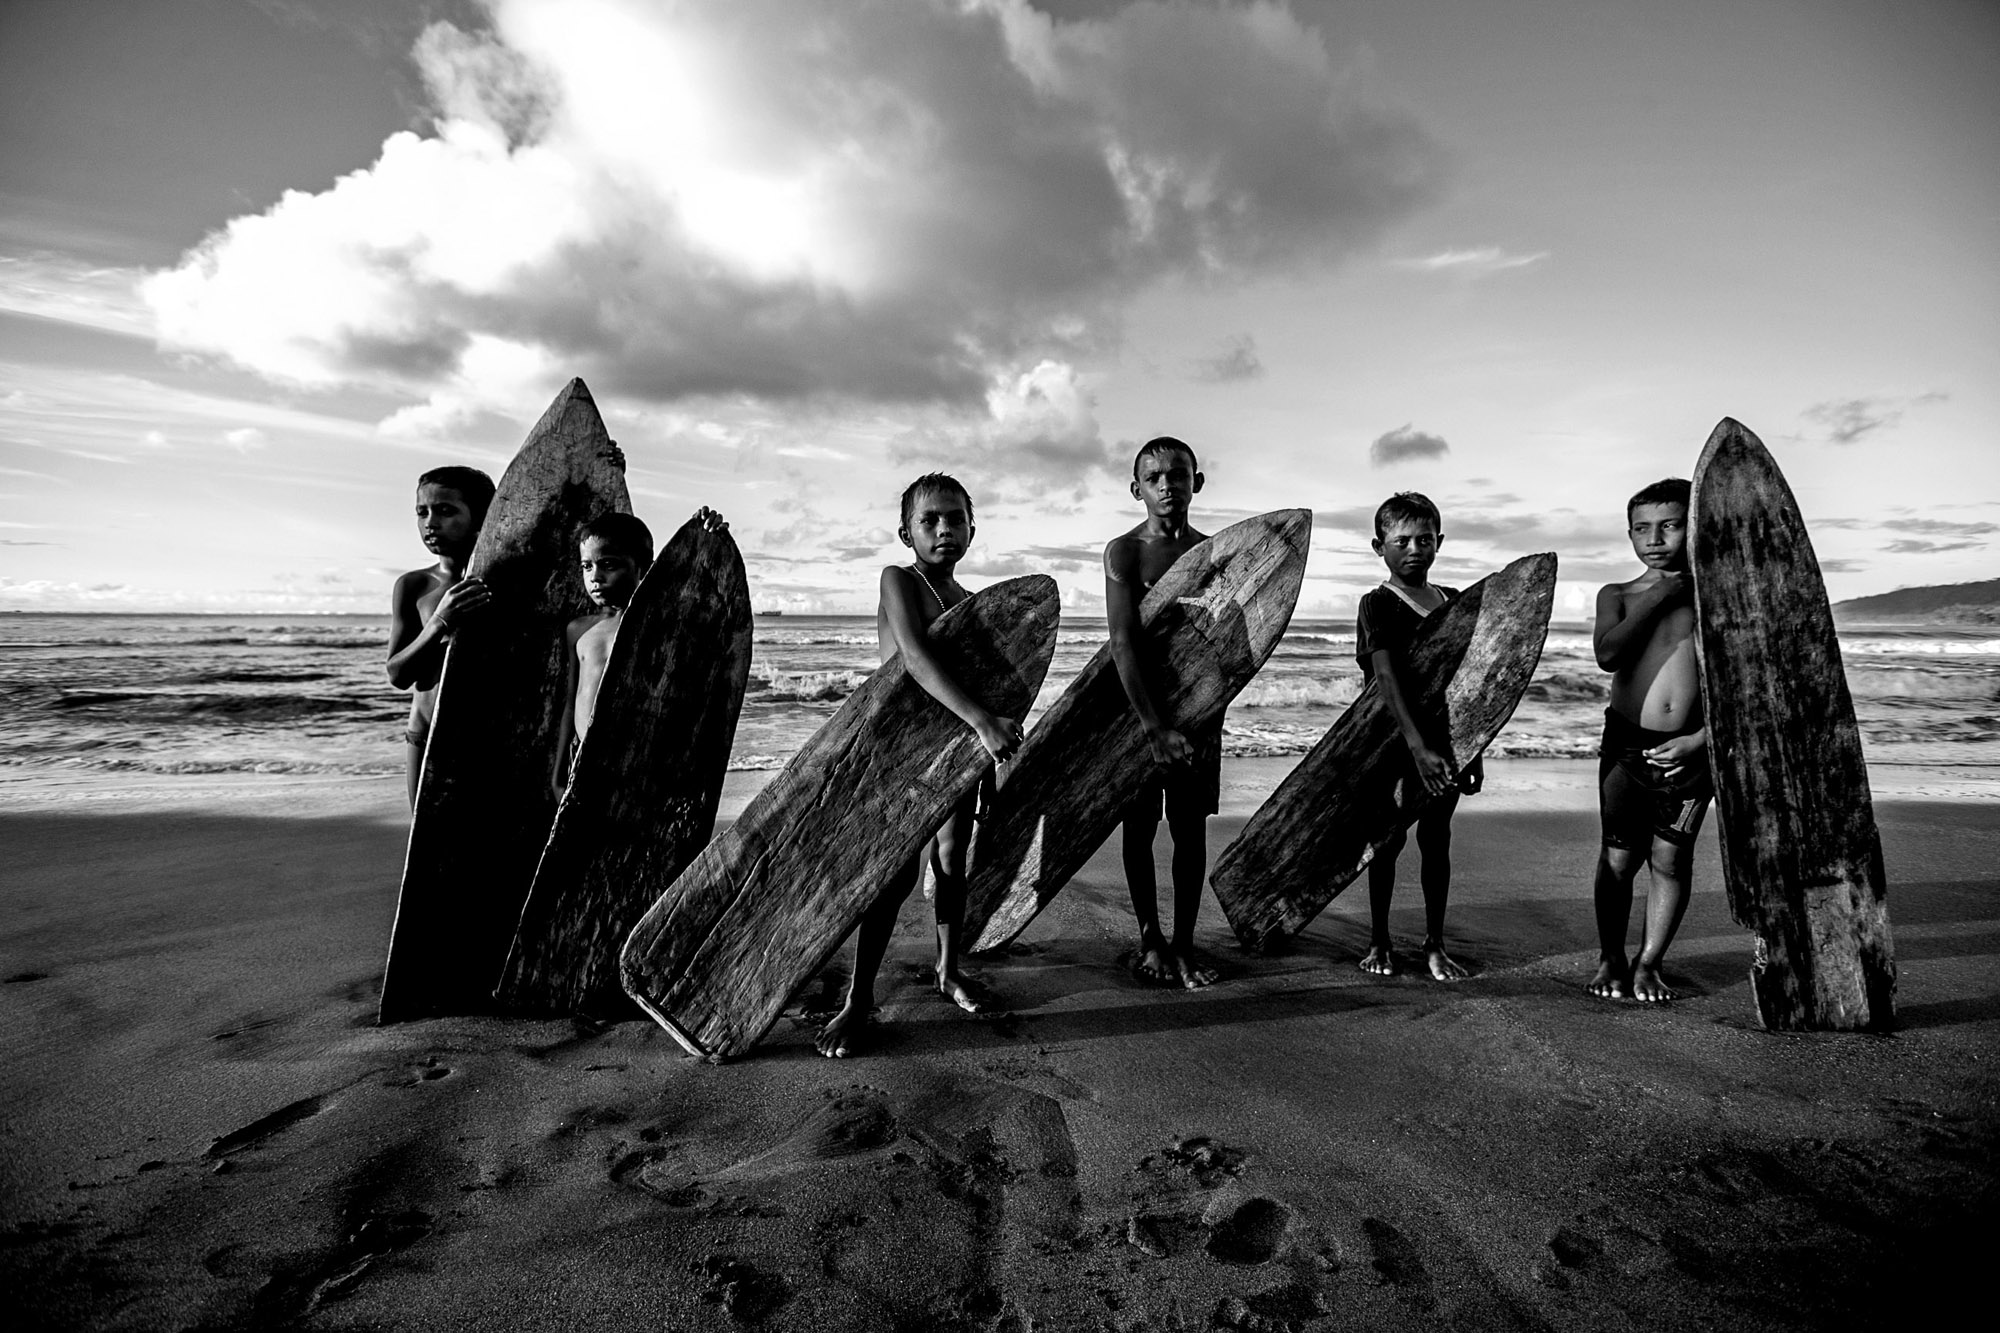 February 2014 Local kids surfing wooden boards-Searching for waves in the Pacific Ocean, Northern Indonesia with Indonesian surfers Marlon Gerber and Mega Semadhi aboard the Pulse surf charter boat. Photo Jason Childs  Photo Credit-(c)Jason Childs